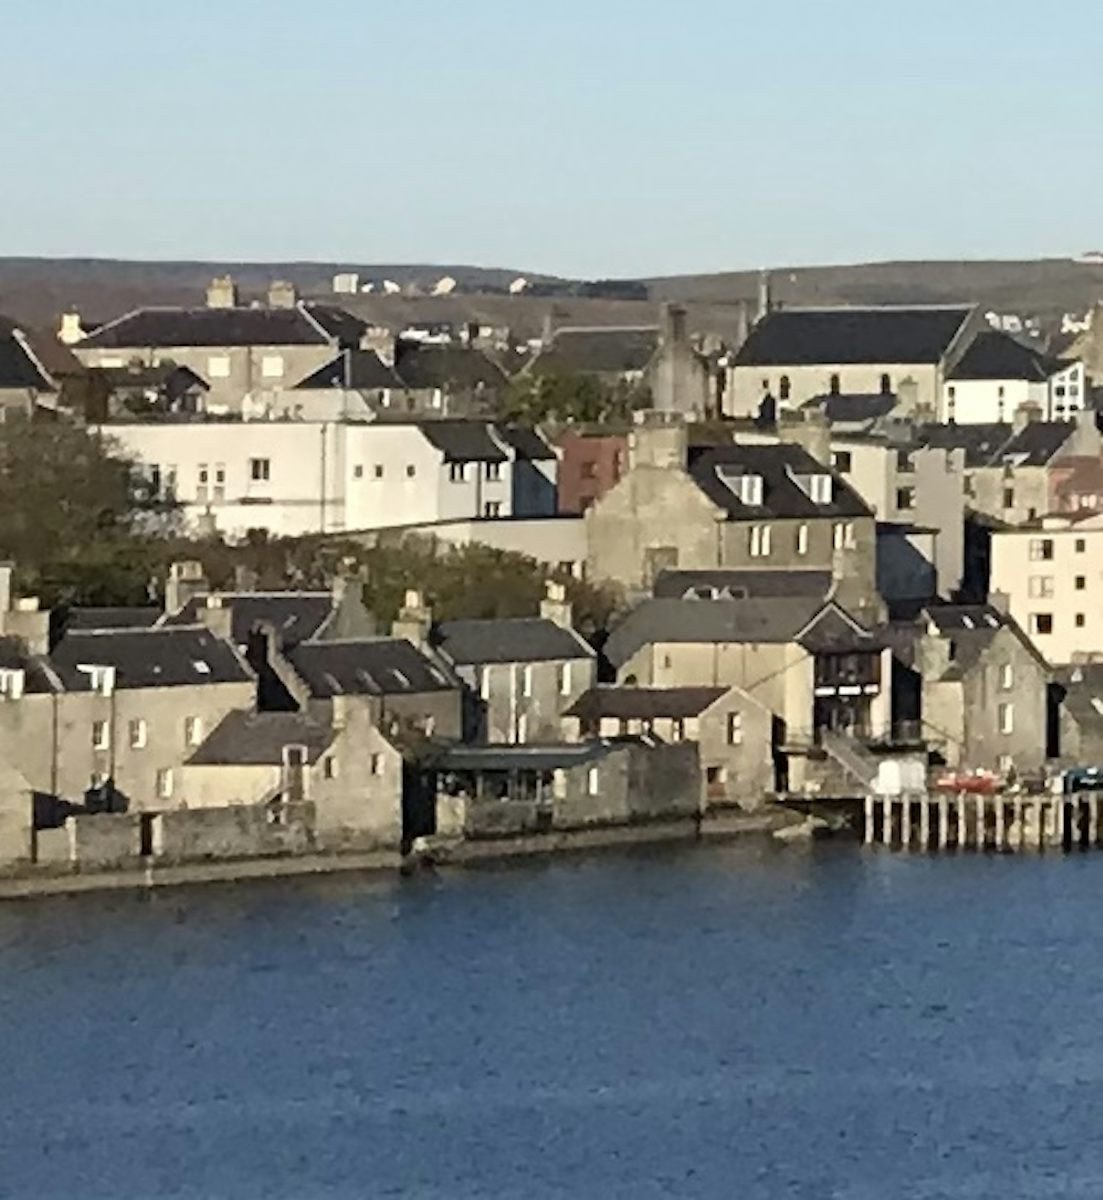 Lerwick the cleanest and friendliest port